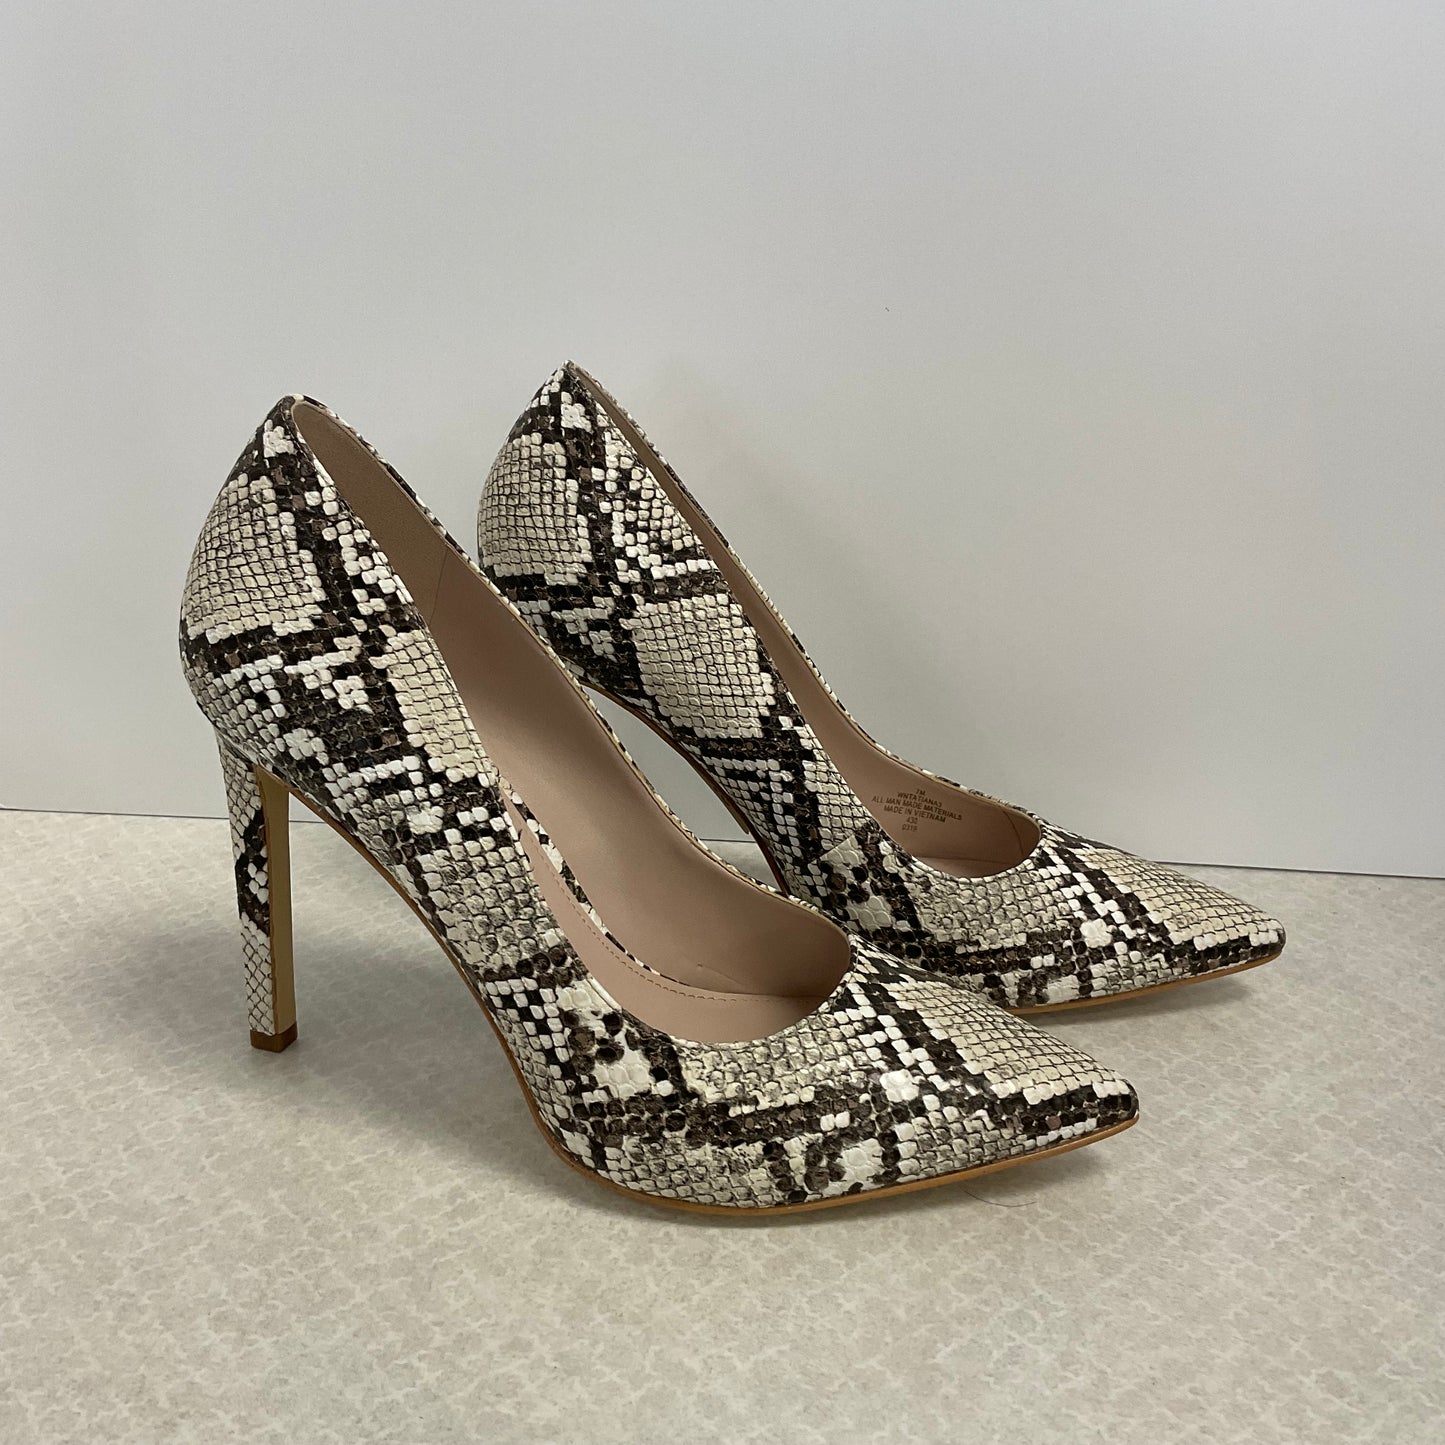 Shoes Heels Stiletto By Nine West Apparel  Size: 7